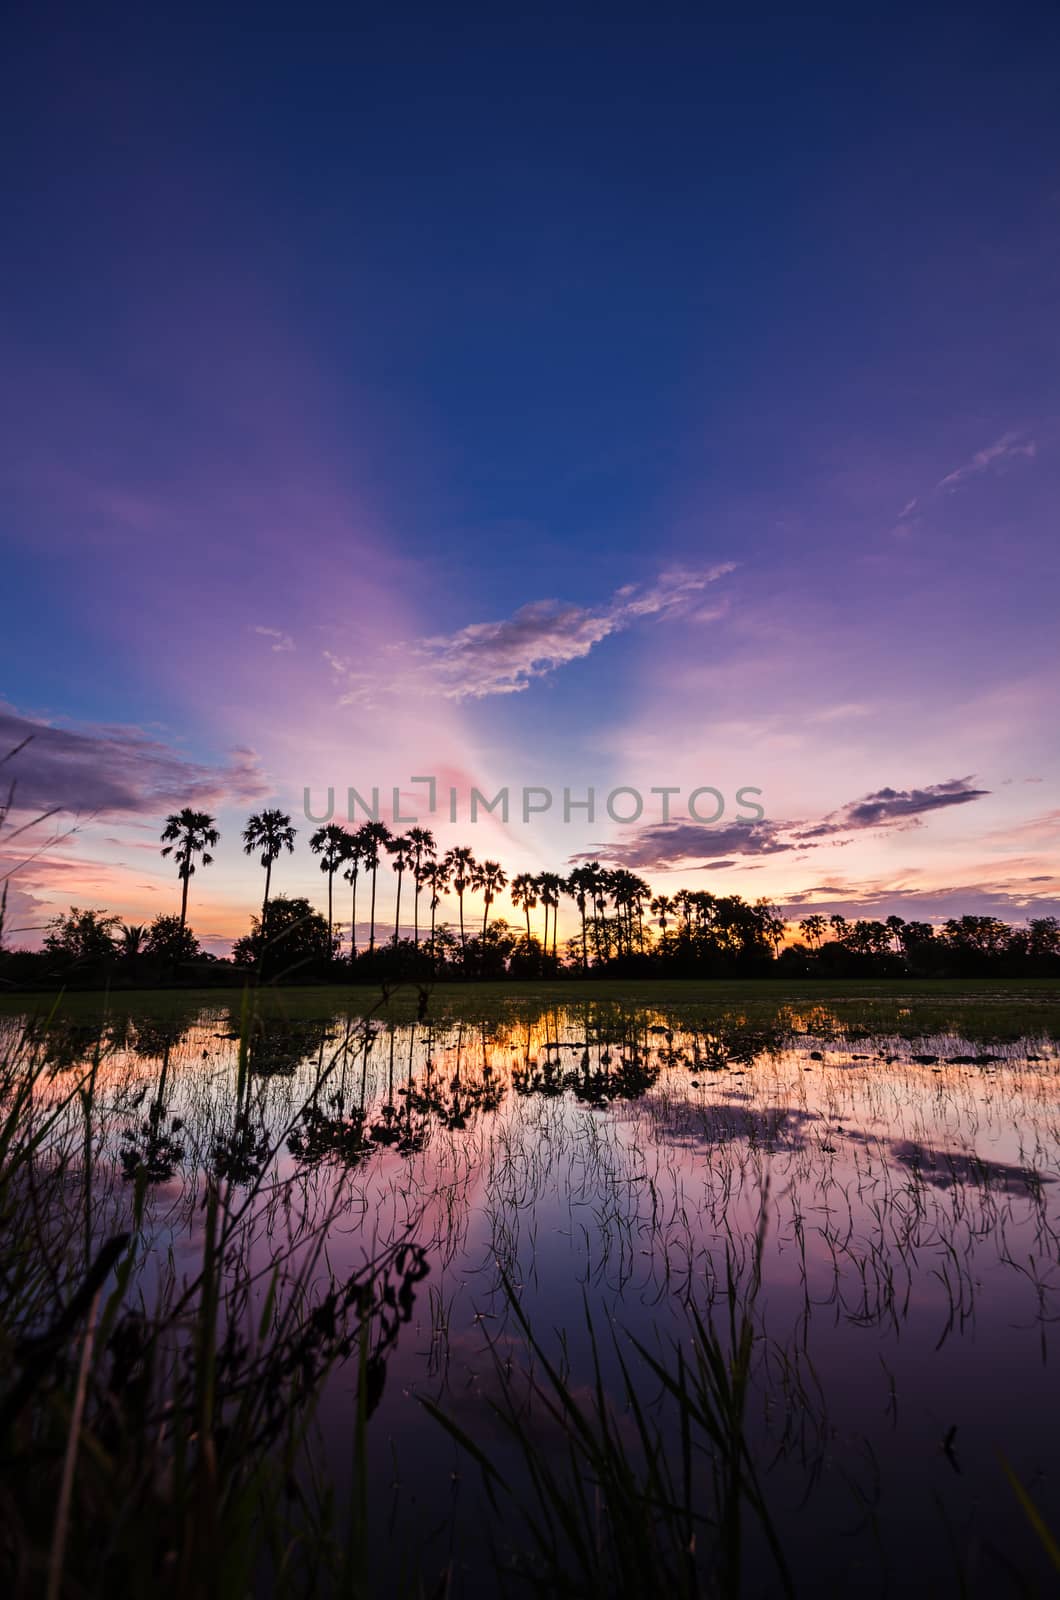 The silhouette of the toddy palms or sugar palm in the field with the colorful sky after sunset background